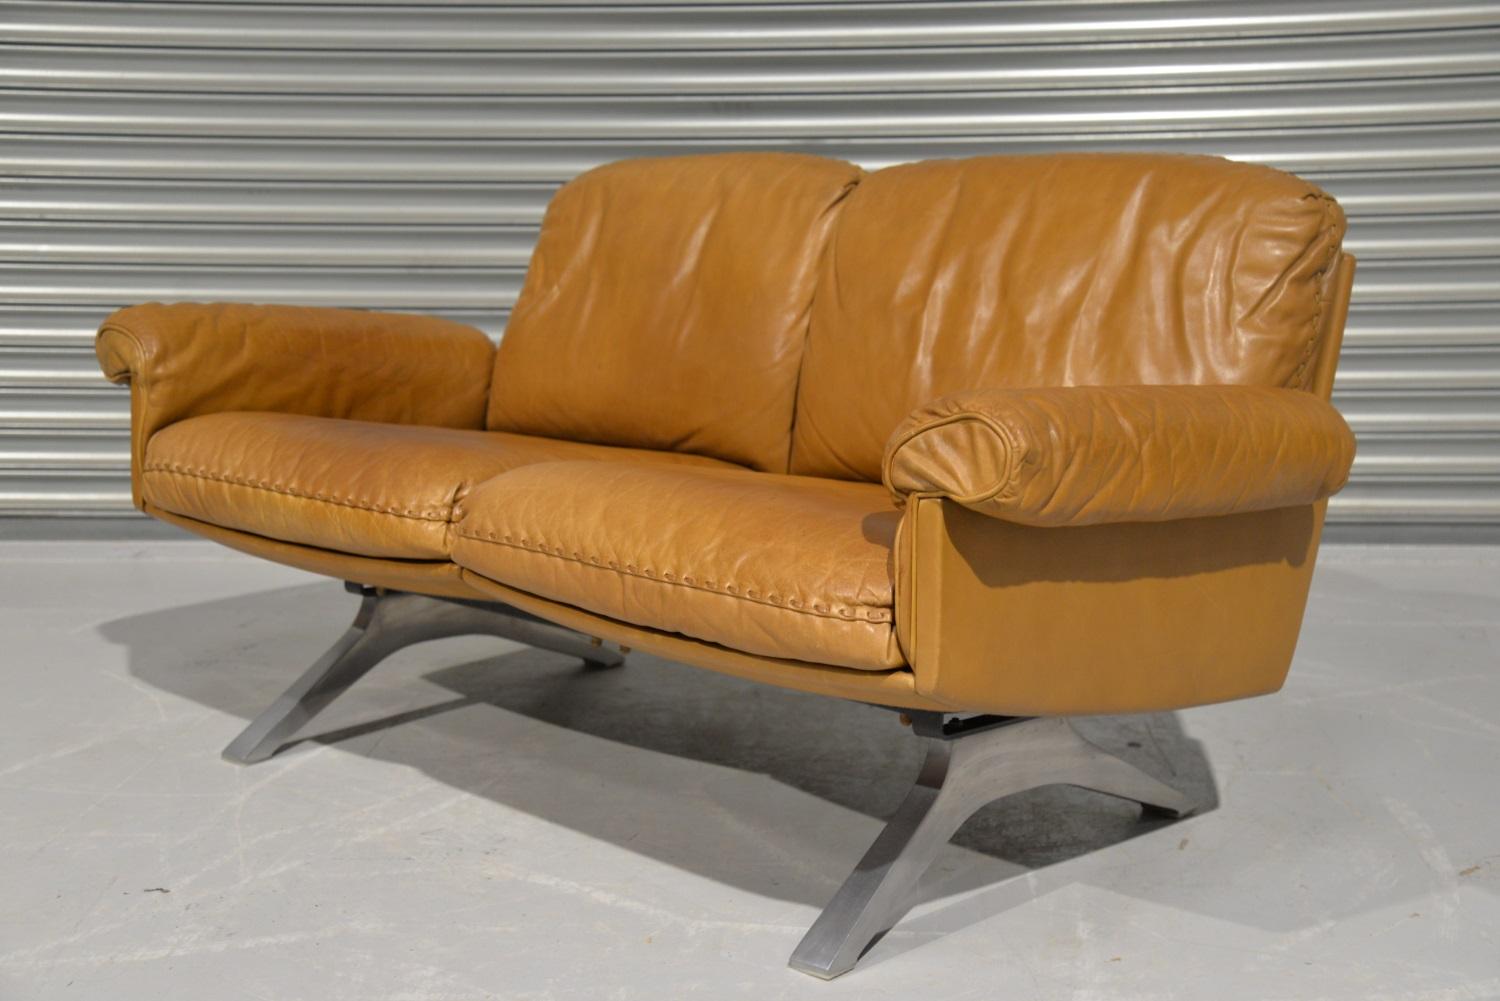 Discounted airfreight for our US and international customers (from 2 weeks door to door)

We are delighted to bring to you a vintage 1970s De Sede DS 31 two-seat sofa or loveseat in aniline leather with superb whipstitch edge detail. Hand built